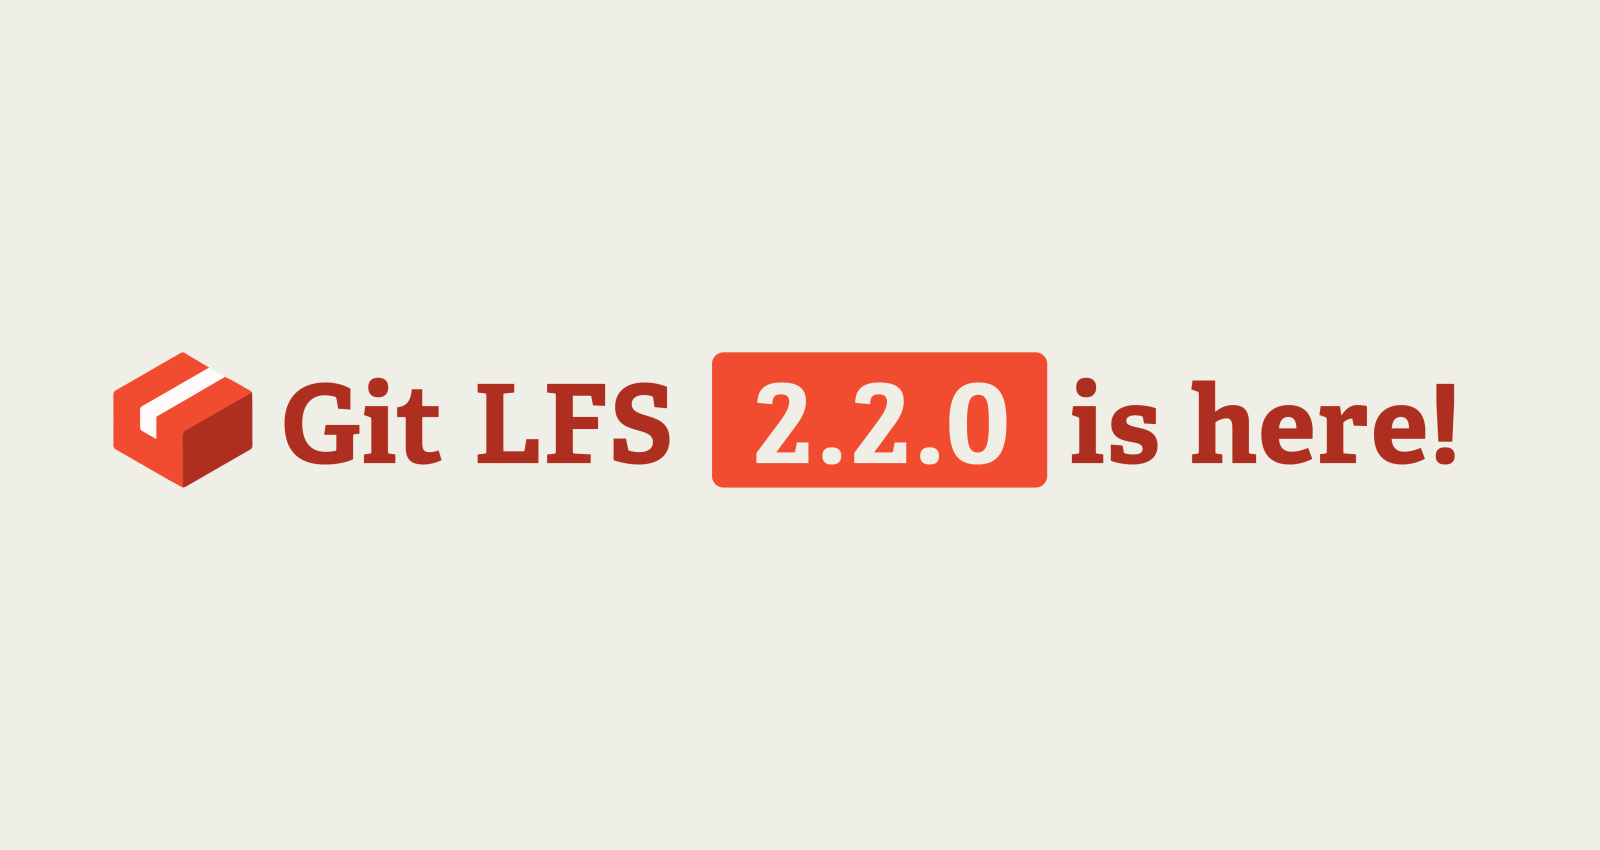 Git LFS v2.2.0 is now available